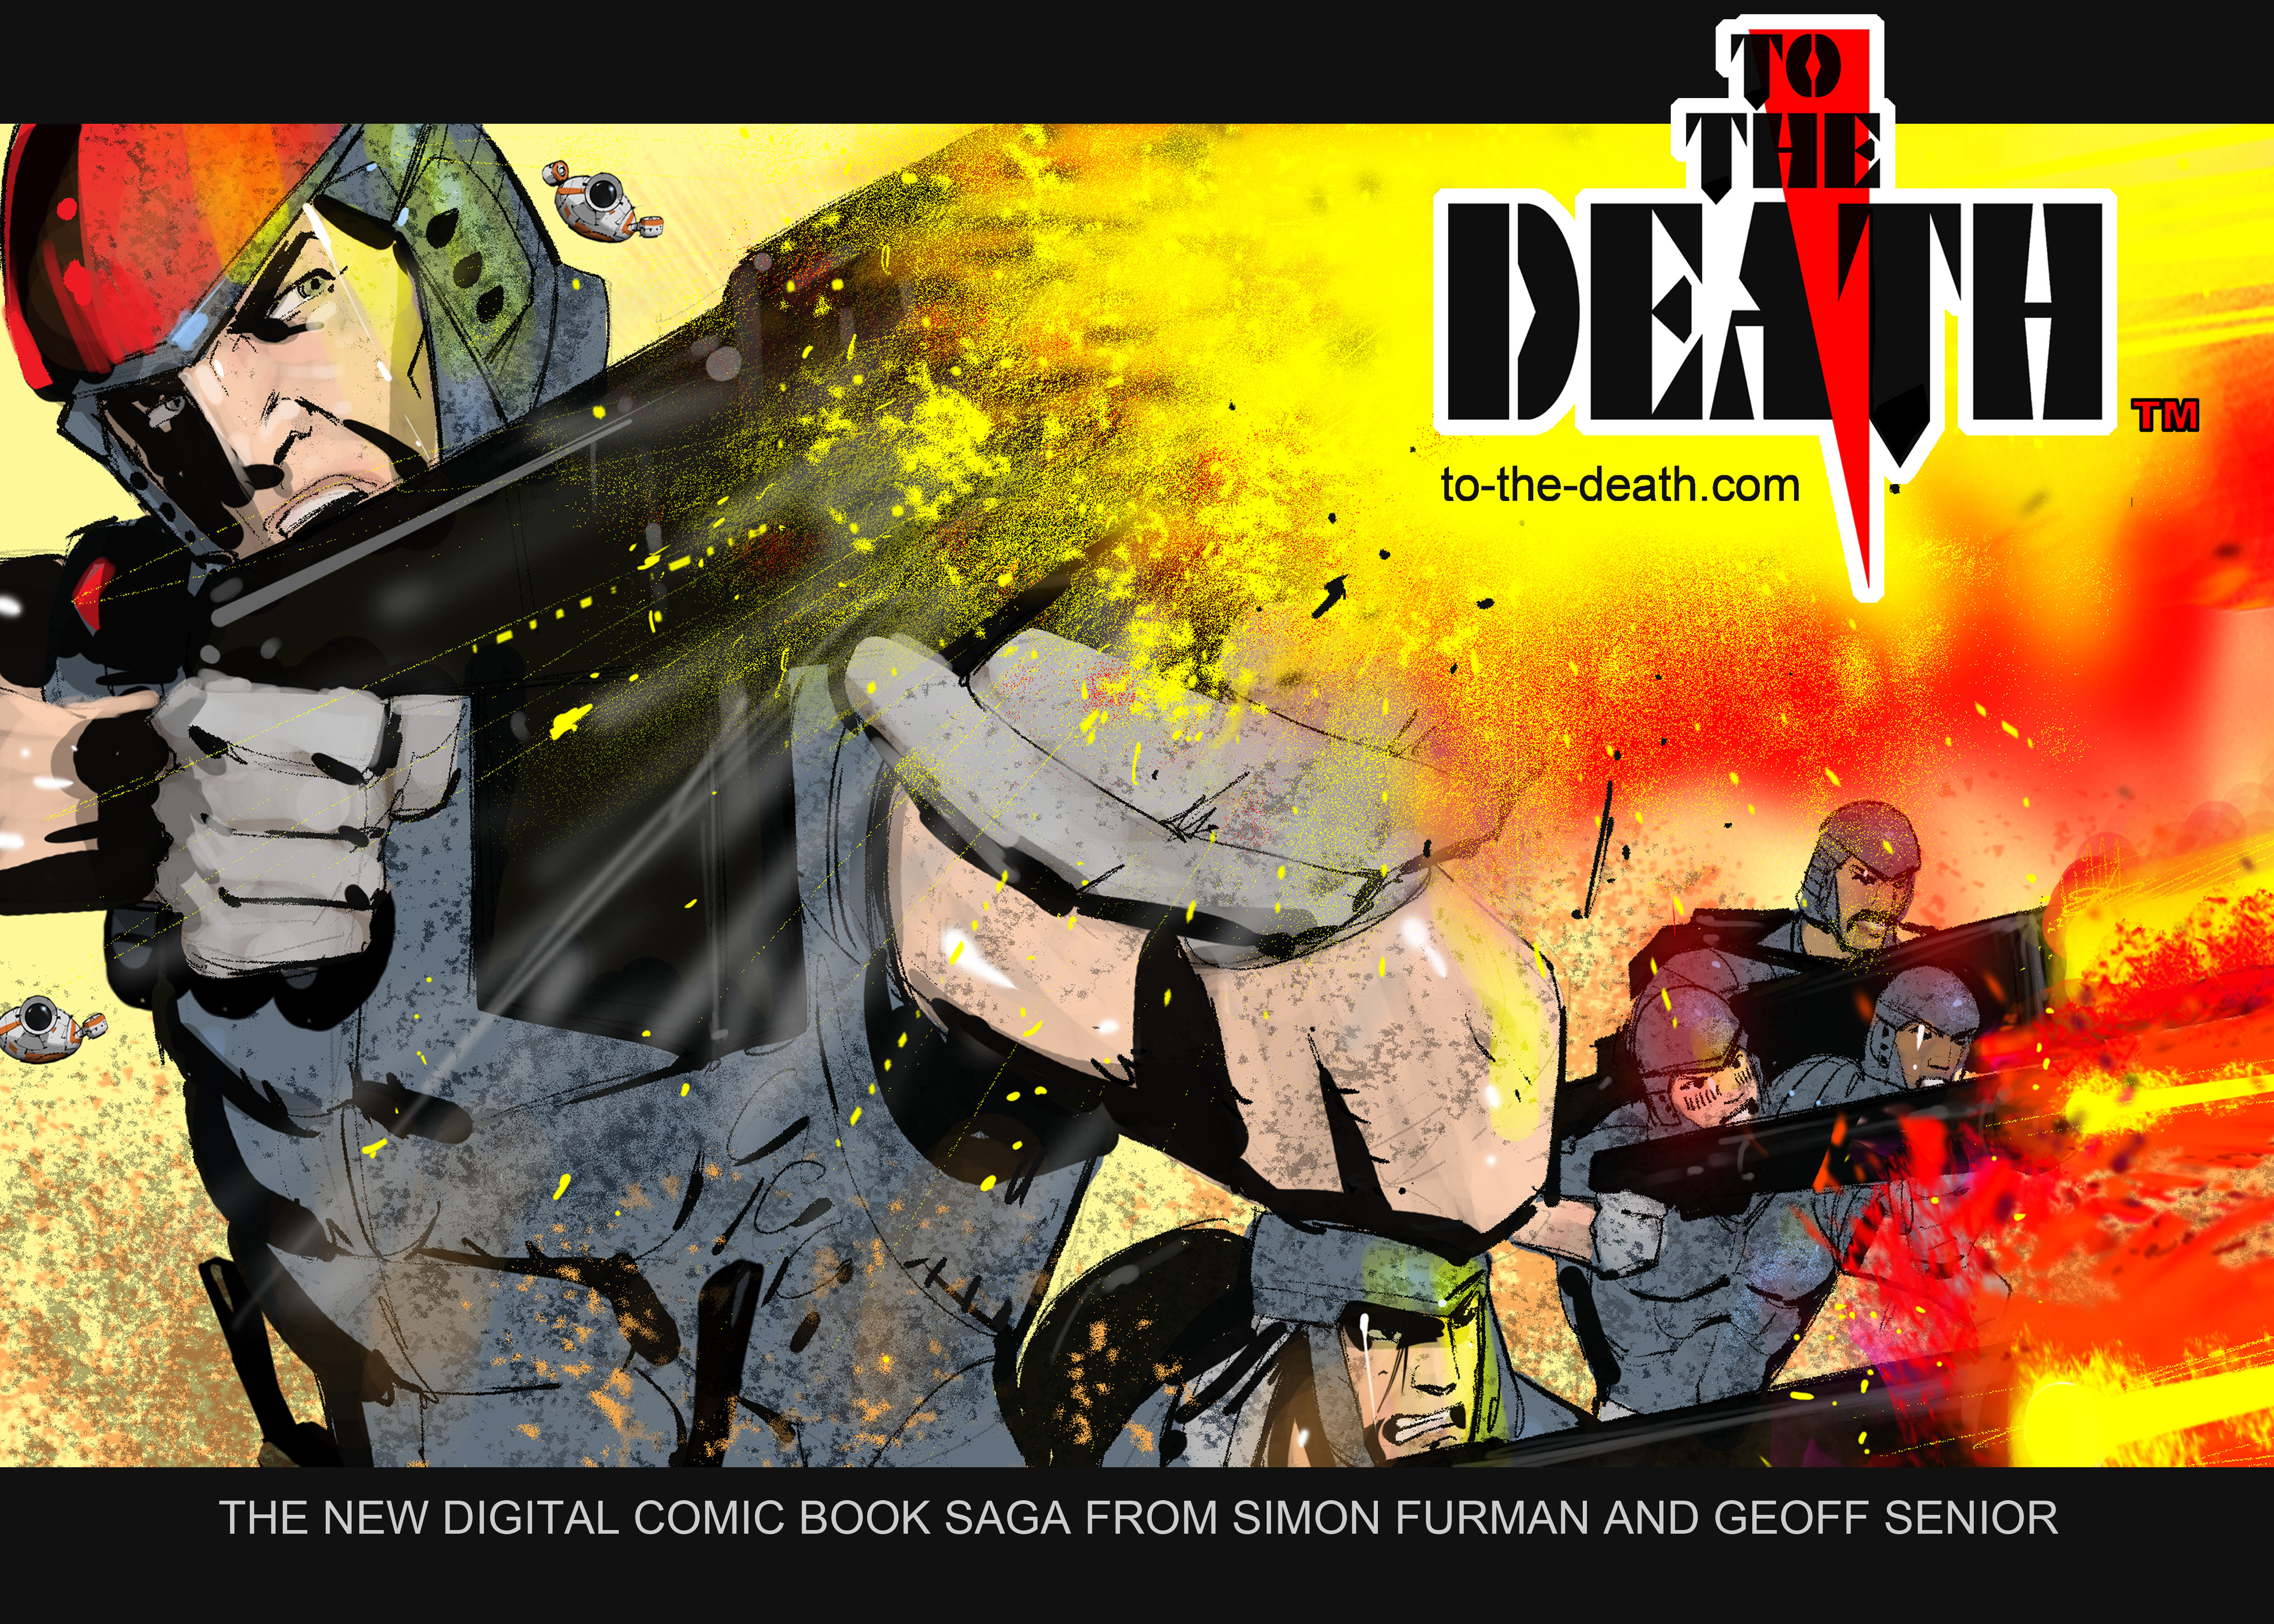 To The Death by Simon Furman and Geoff Senior